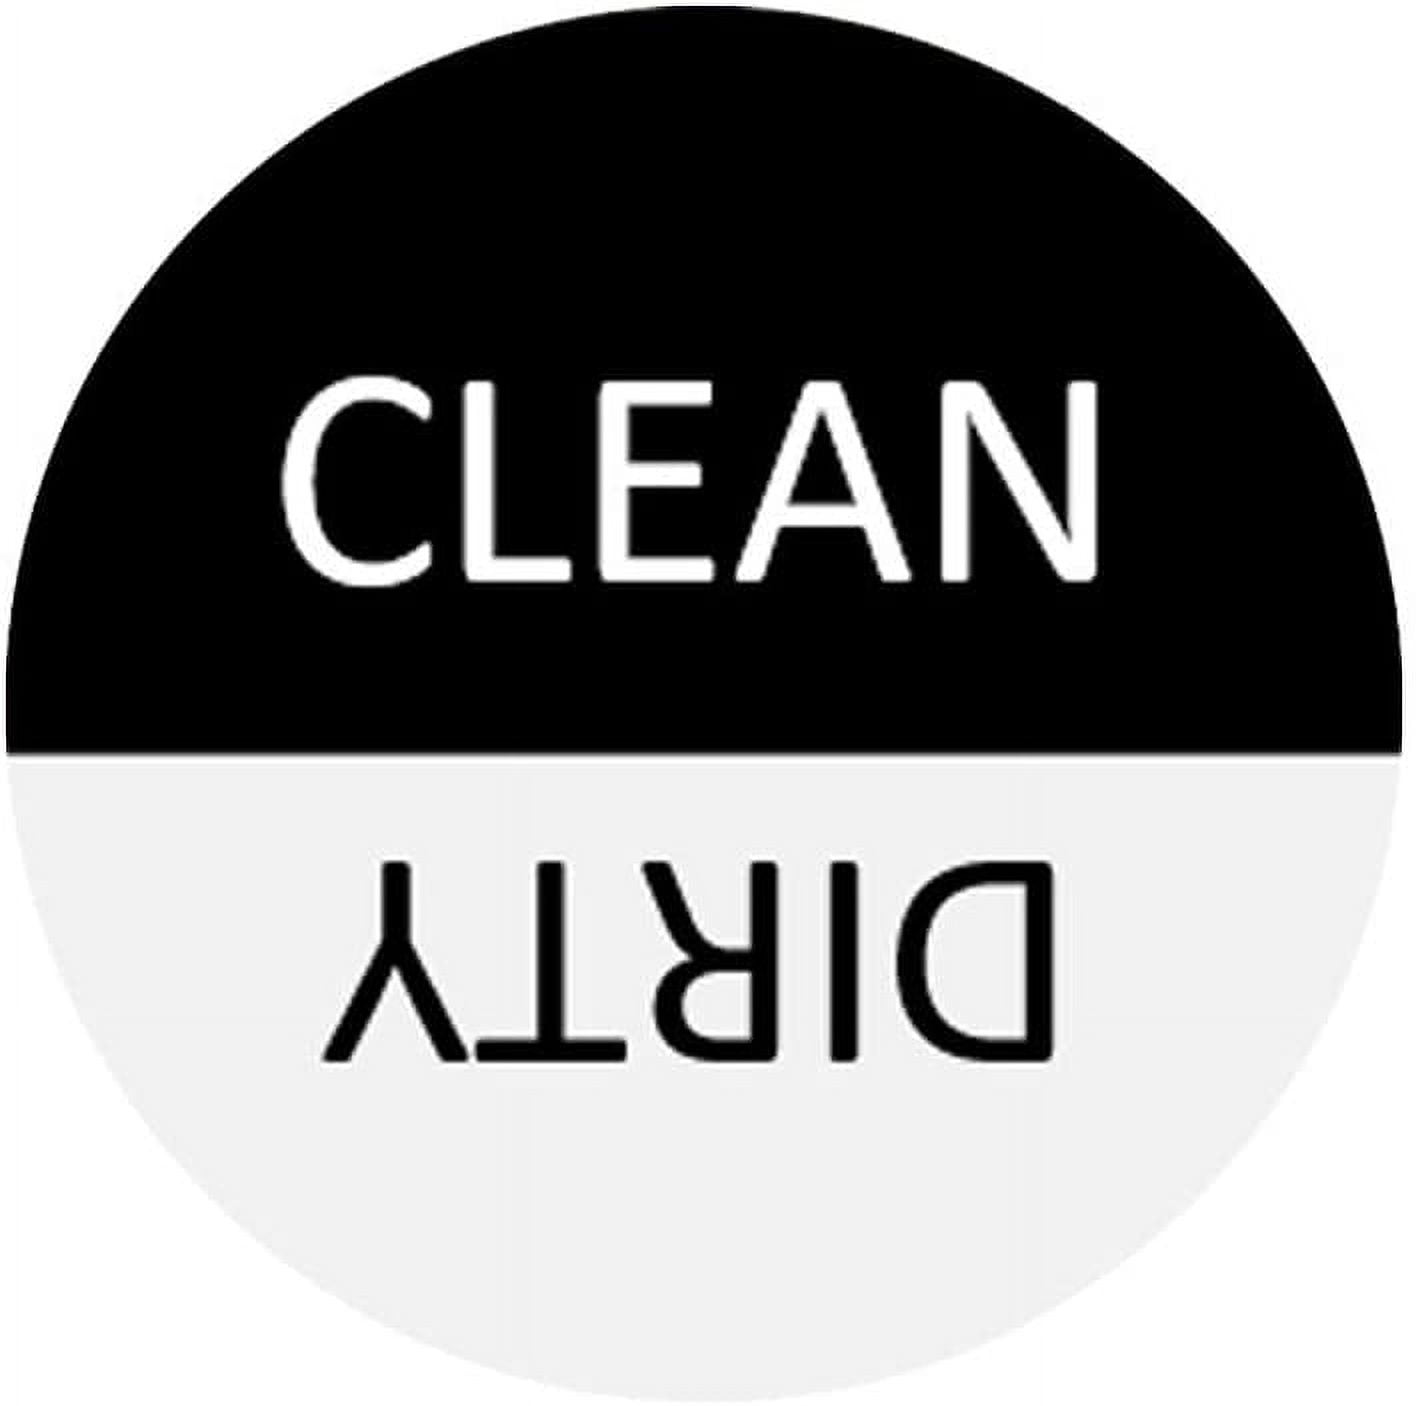 Clean Dirty Dishwasher Magnet Sign - Funny Shakespeare Design